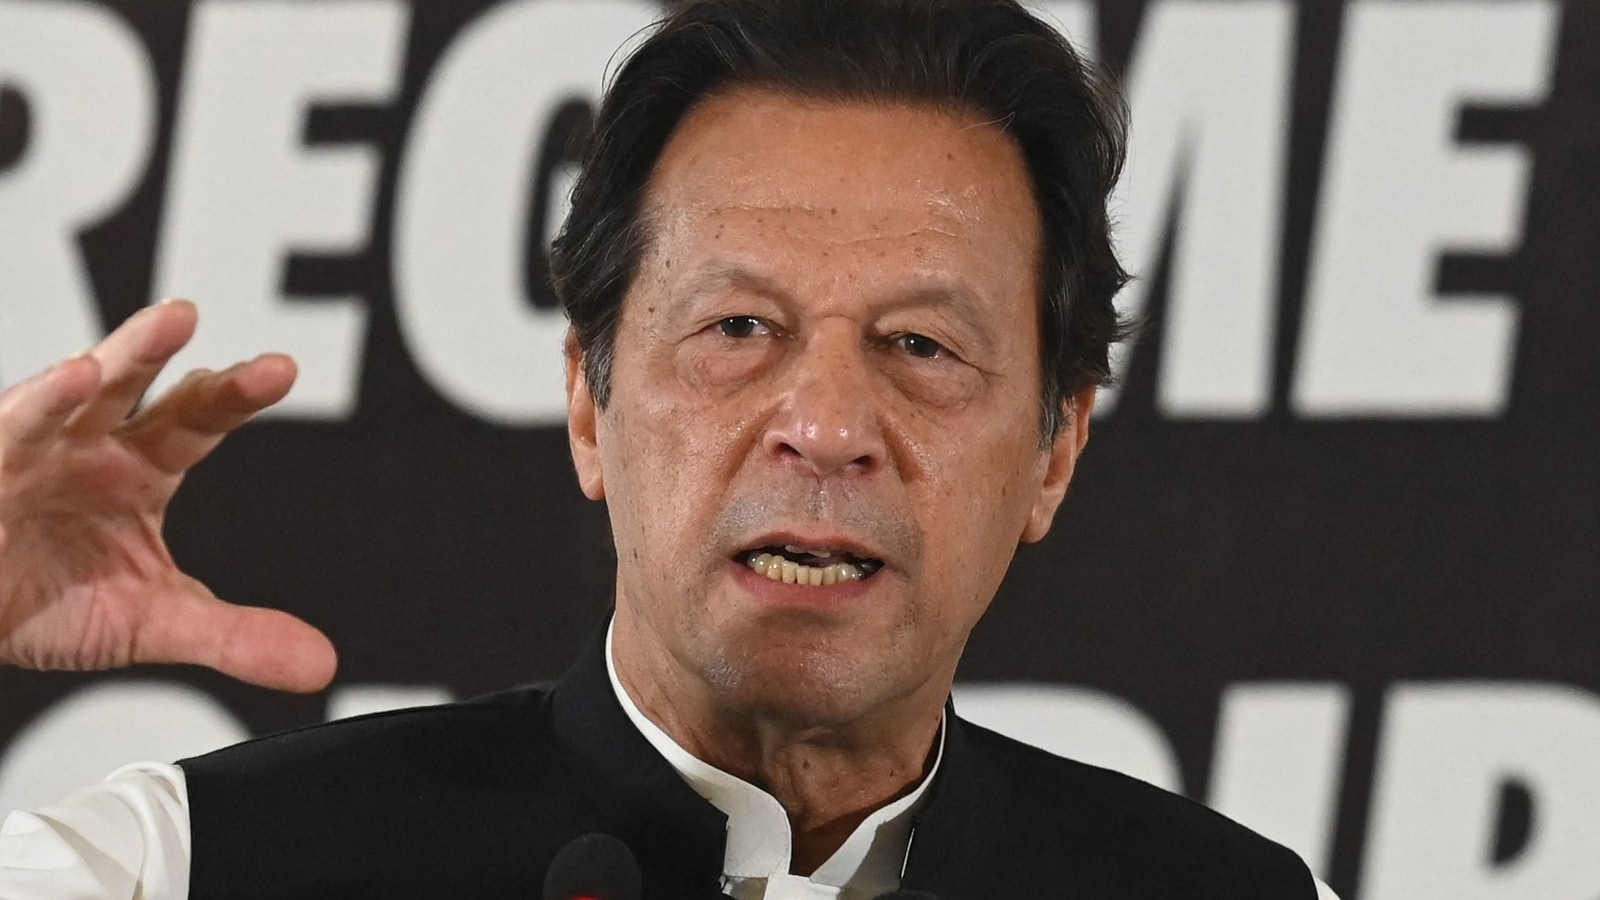 Collection of Over 999+ Stunning 4K Images of Imran Khan